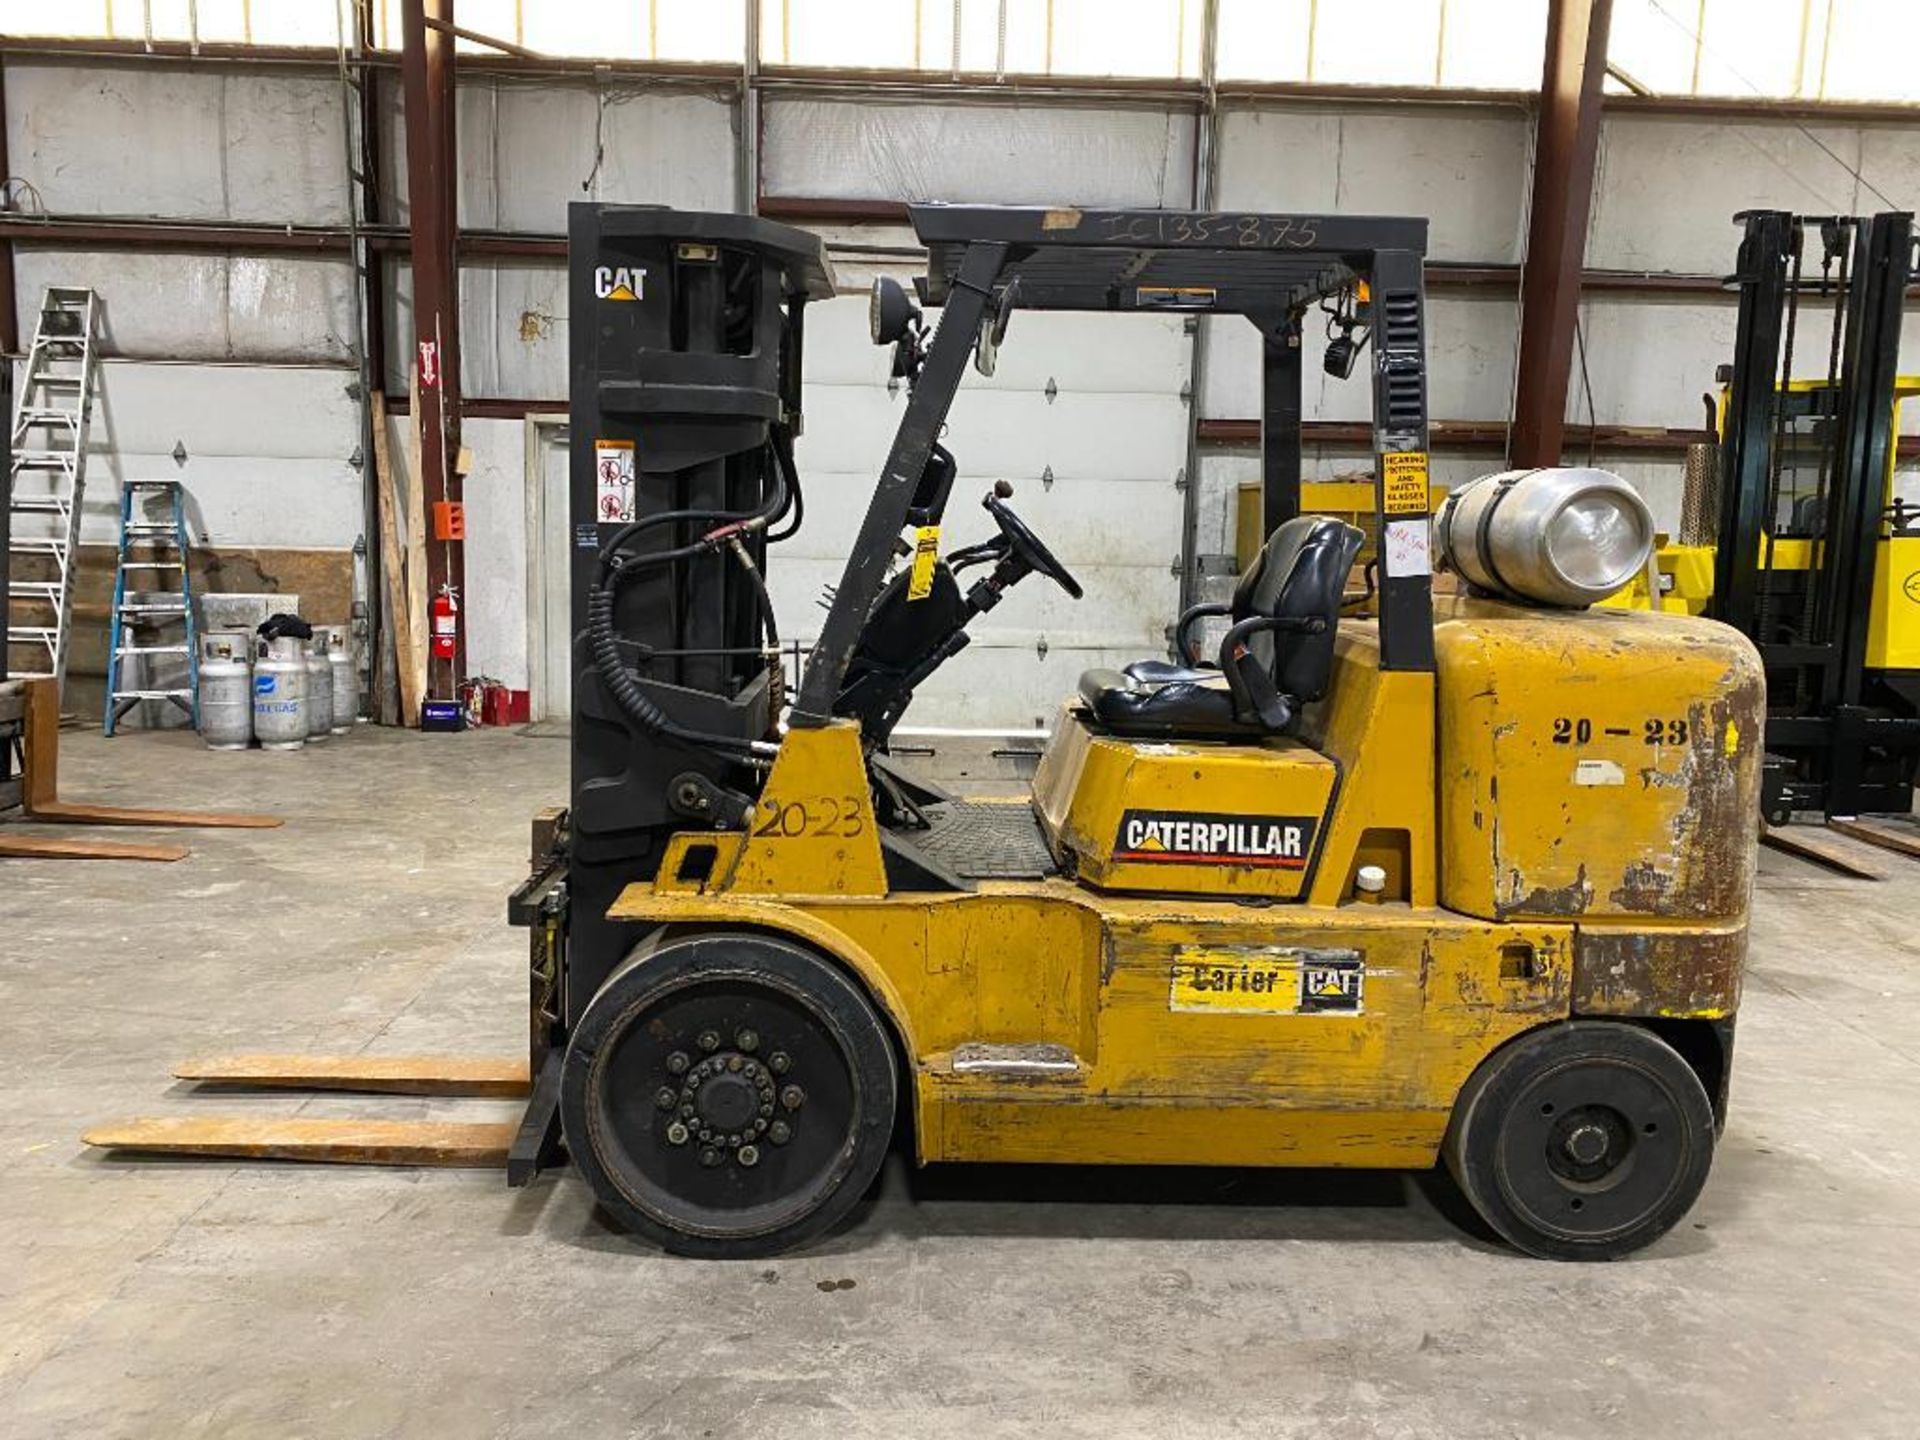 Caterpillar 13,500-LB. Capacity Forklift, Model GC60K, S/N AT8900875, LPG, Cushion Tires, 3-Stage Ma